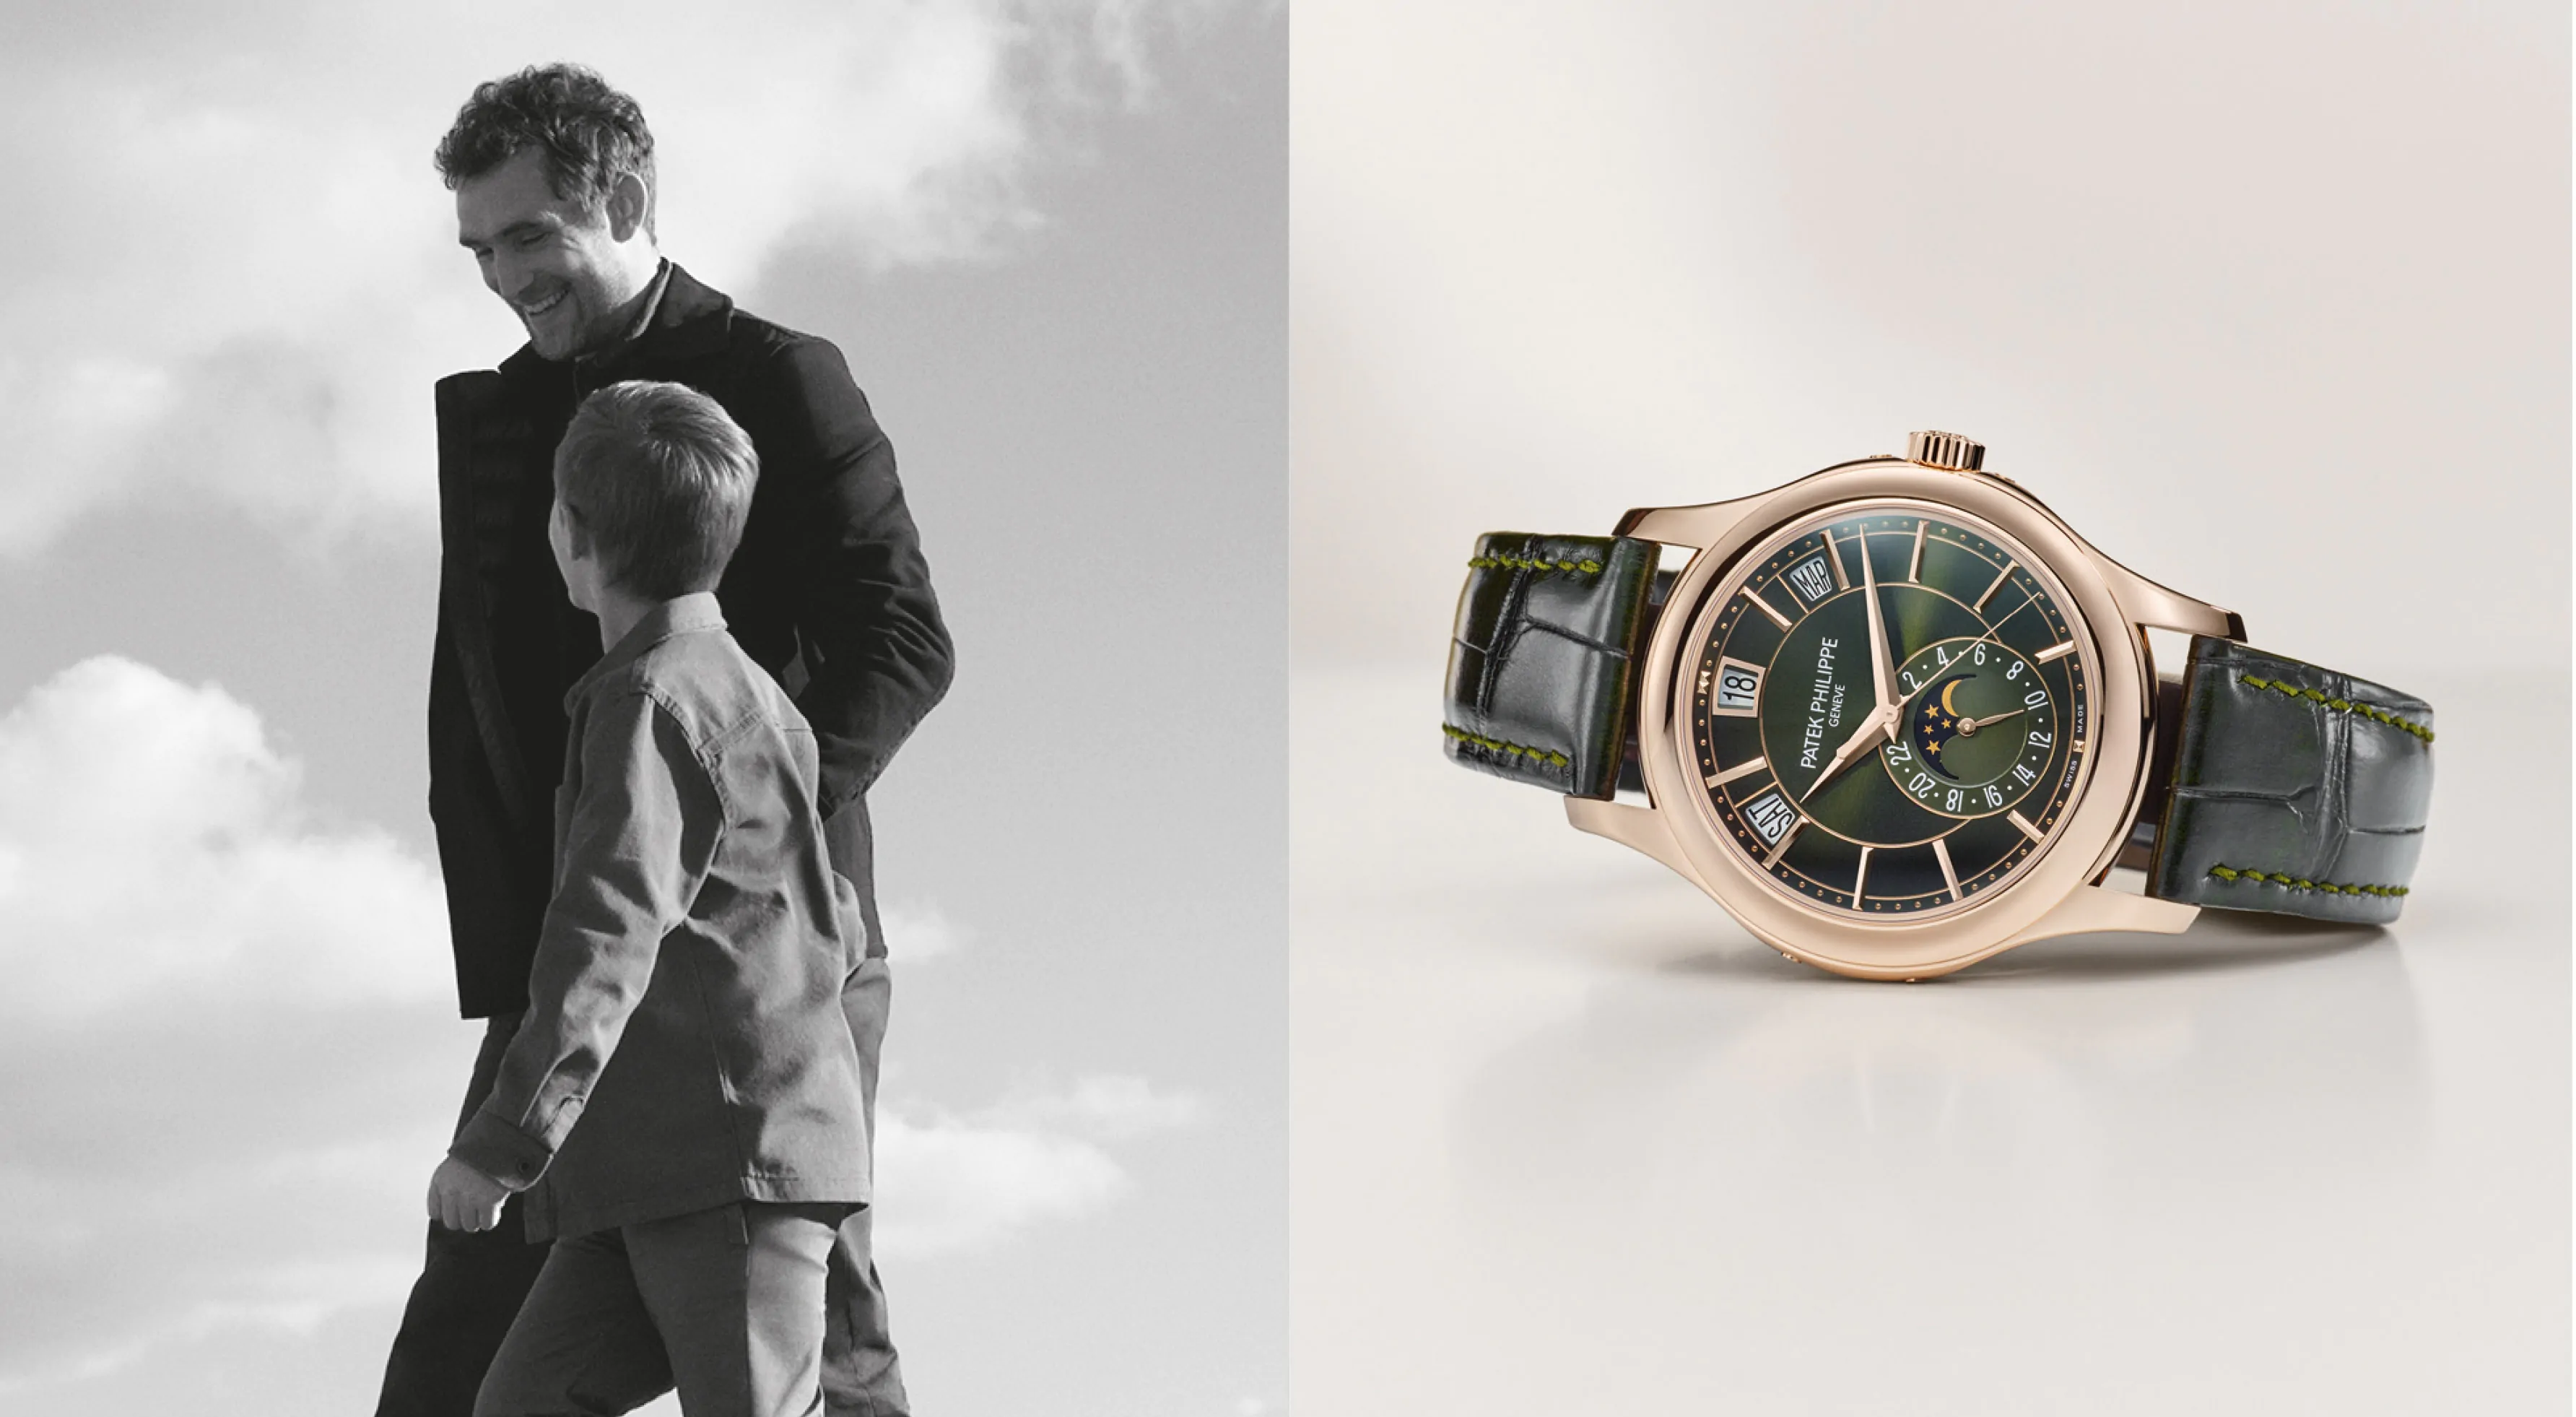 Patek Philippe: A Gift that Transcends Generations